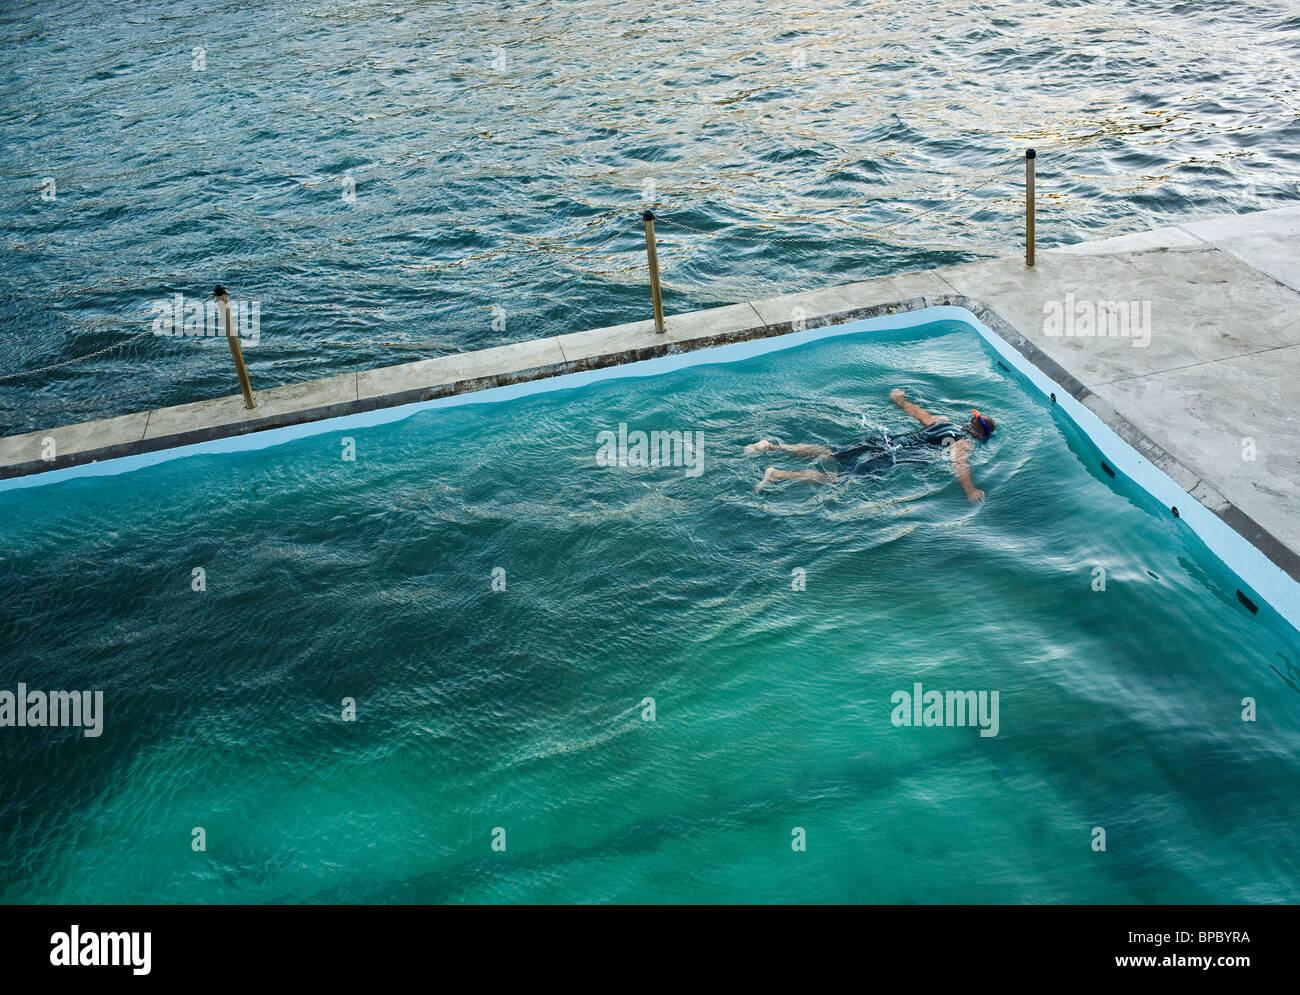 A swimmer floating and snorkeling in a seaside pool. Stock Photo